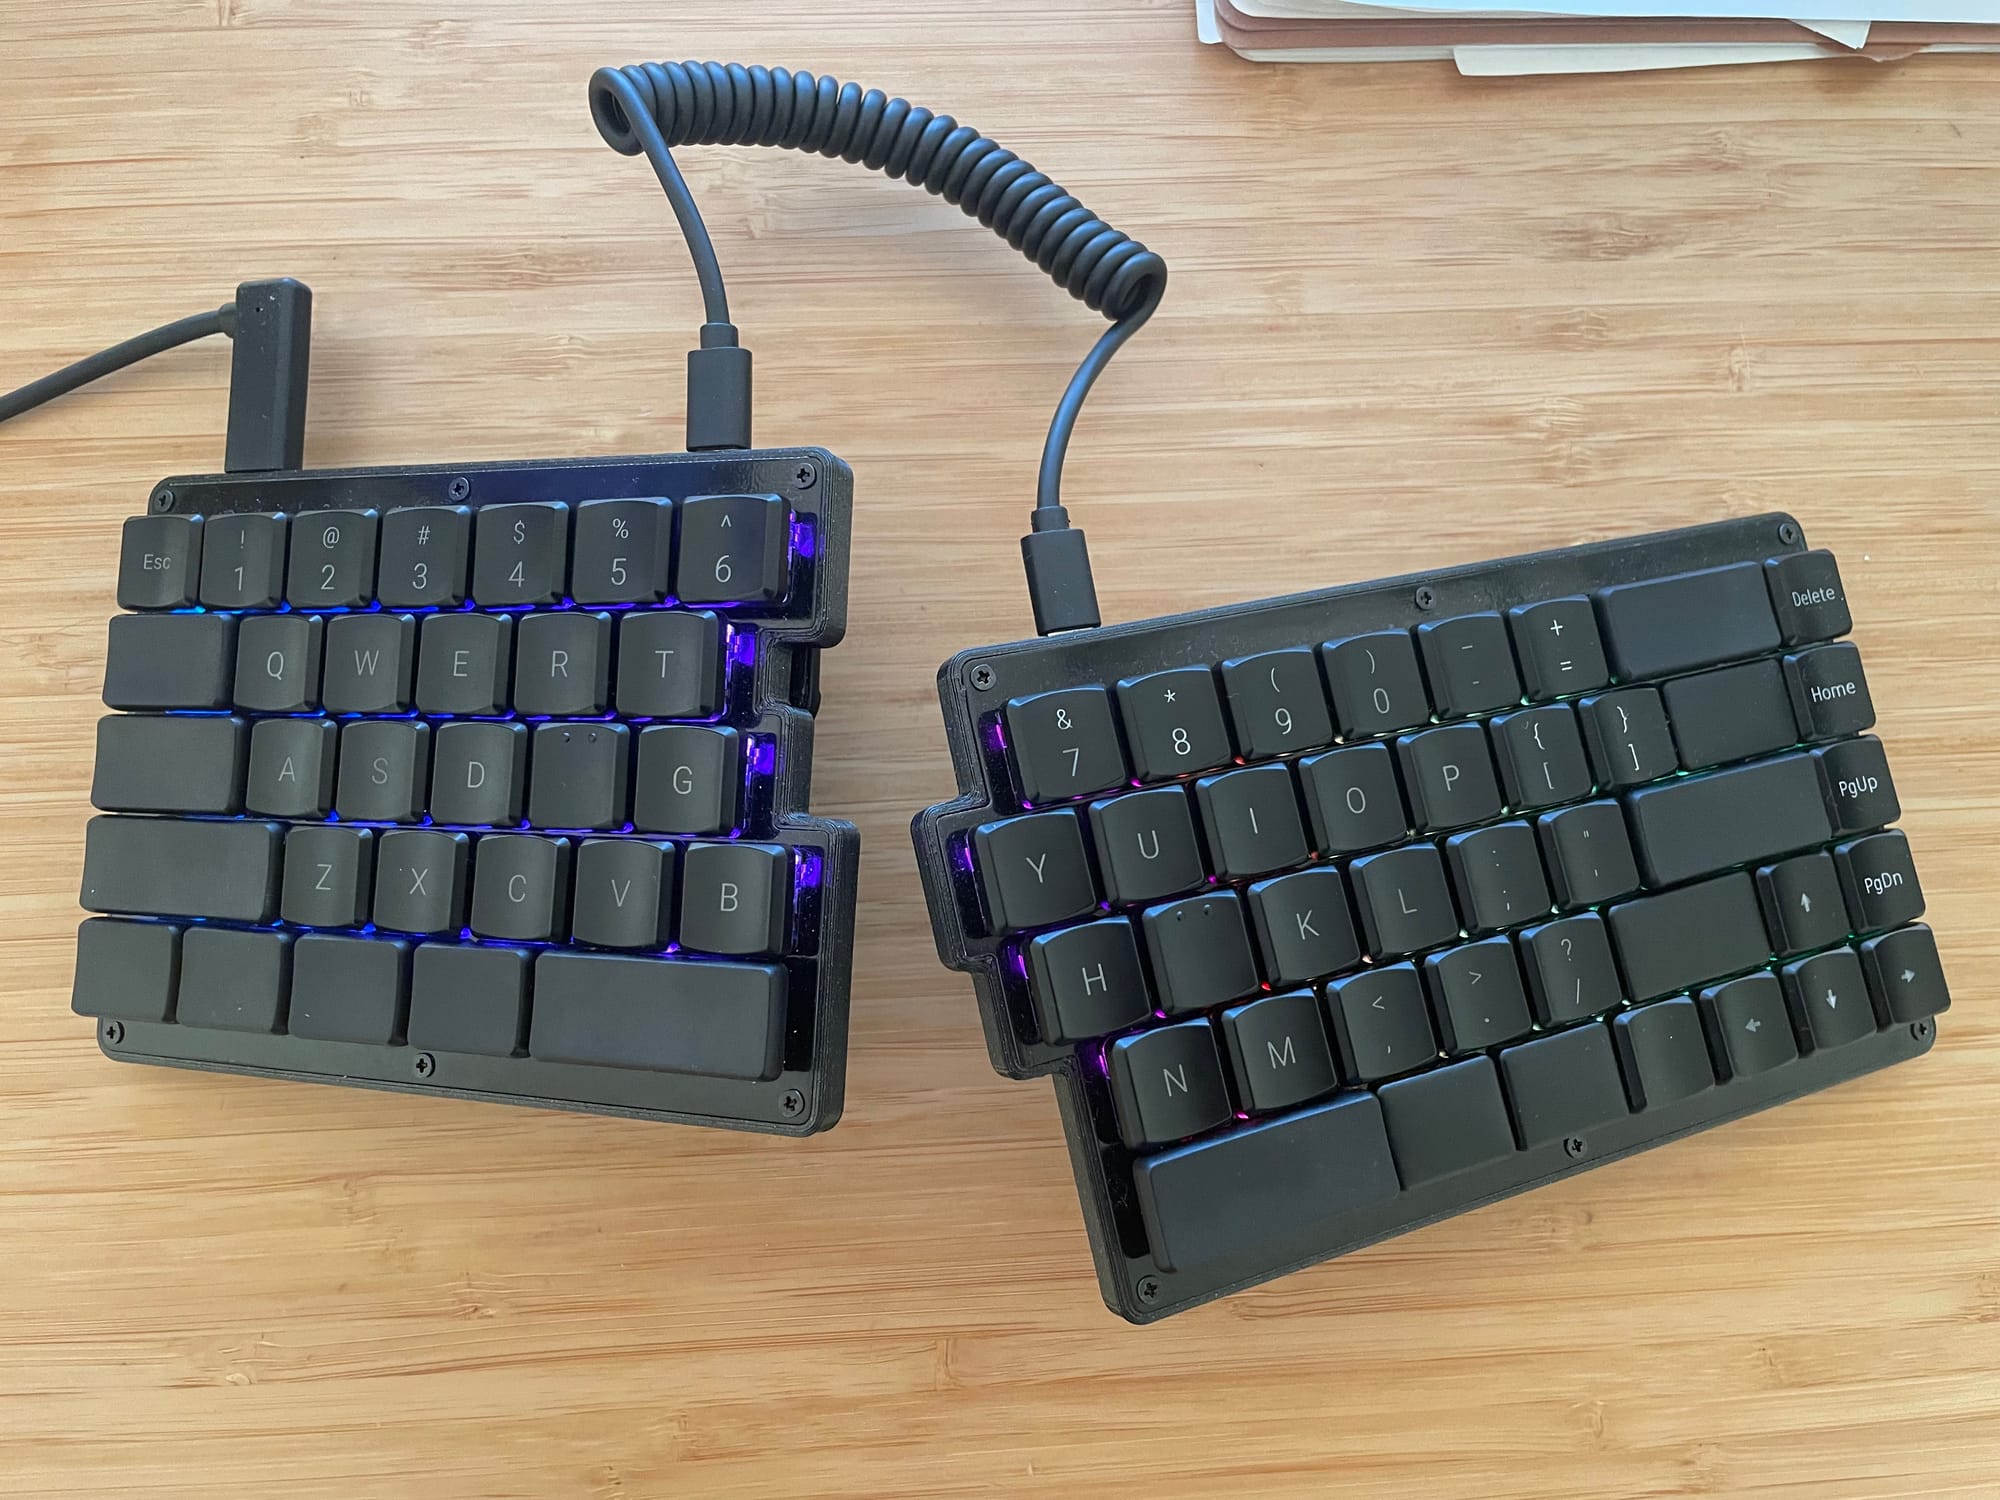 The endless search for a better ergonomic keyboard